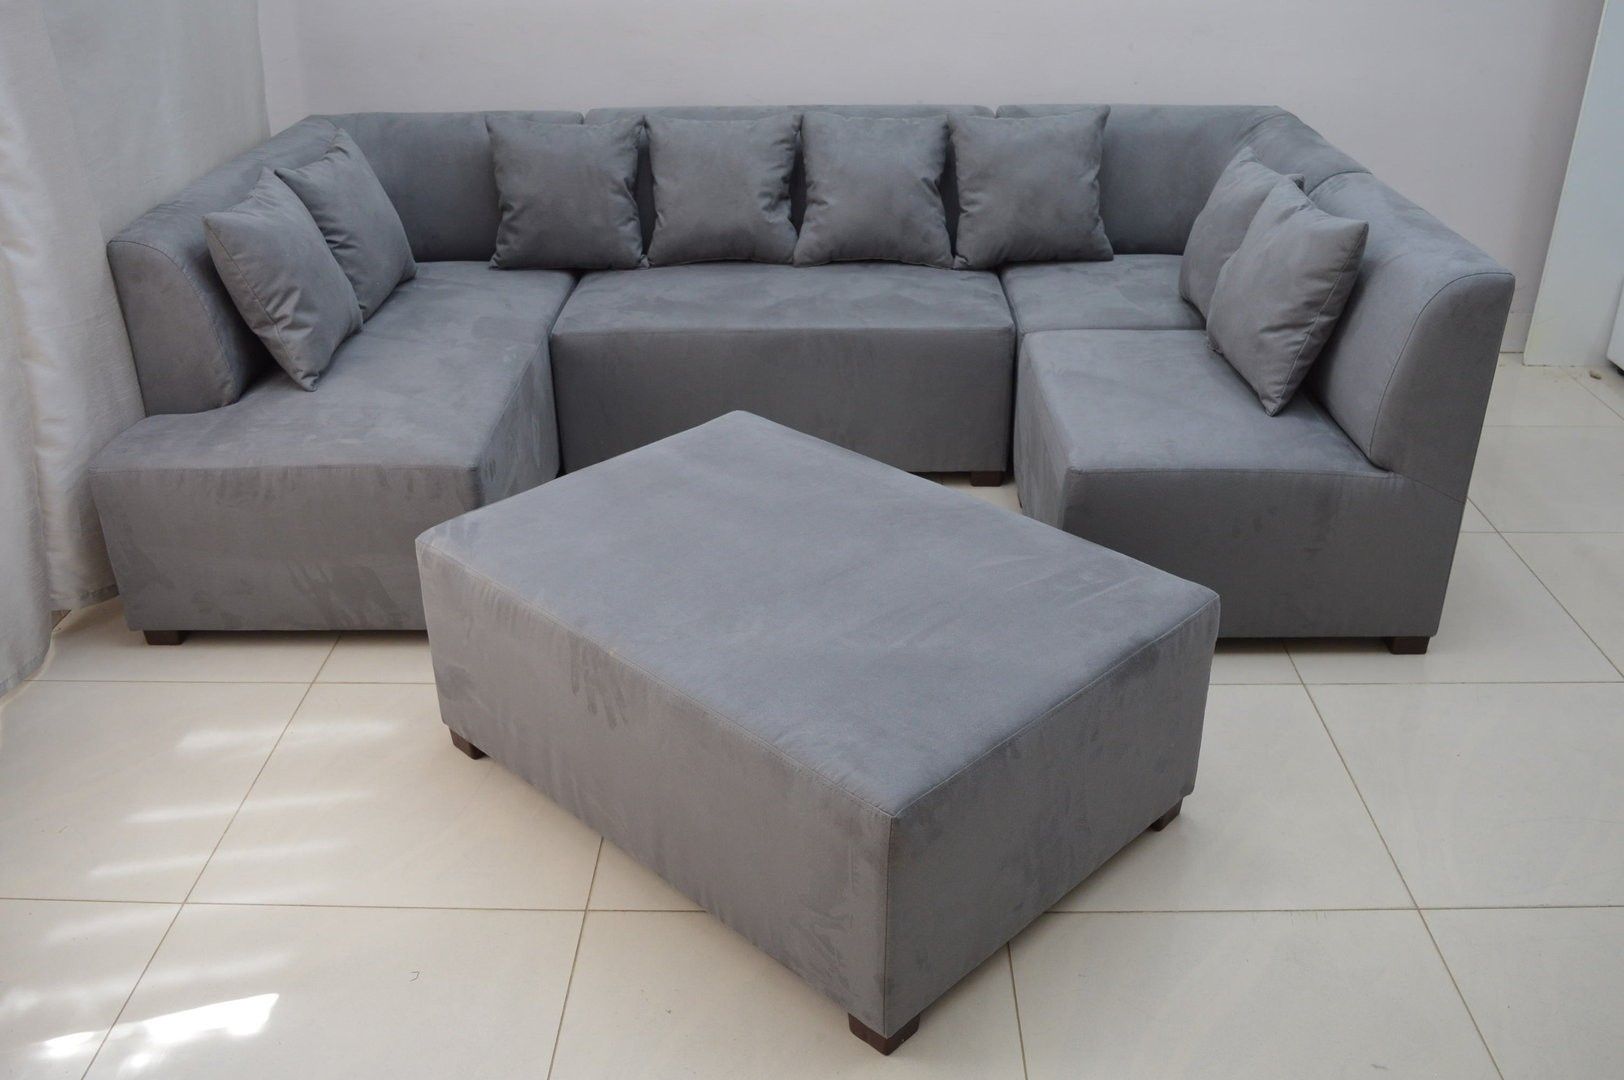 Faux Suede Sofas | Www.stkittsvilla With Regard To Faux Suede Sofas (Photo 7 of 10)